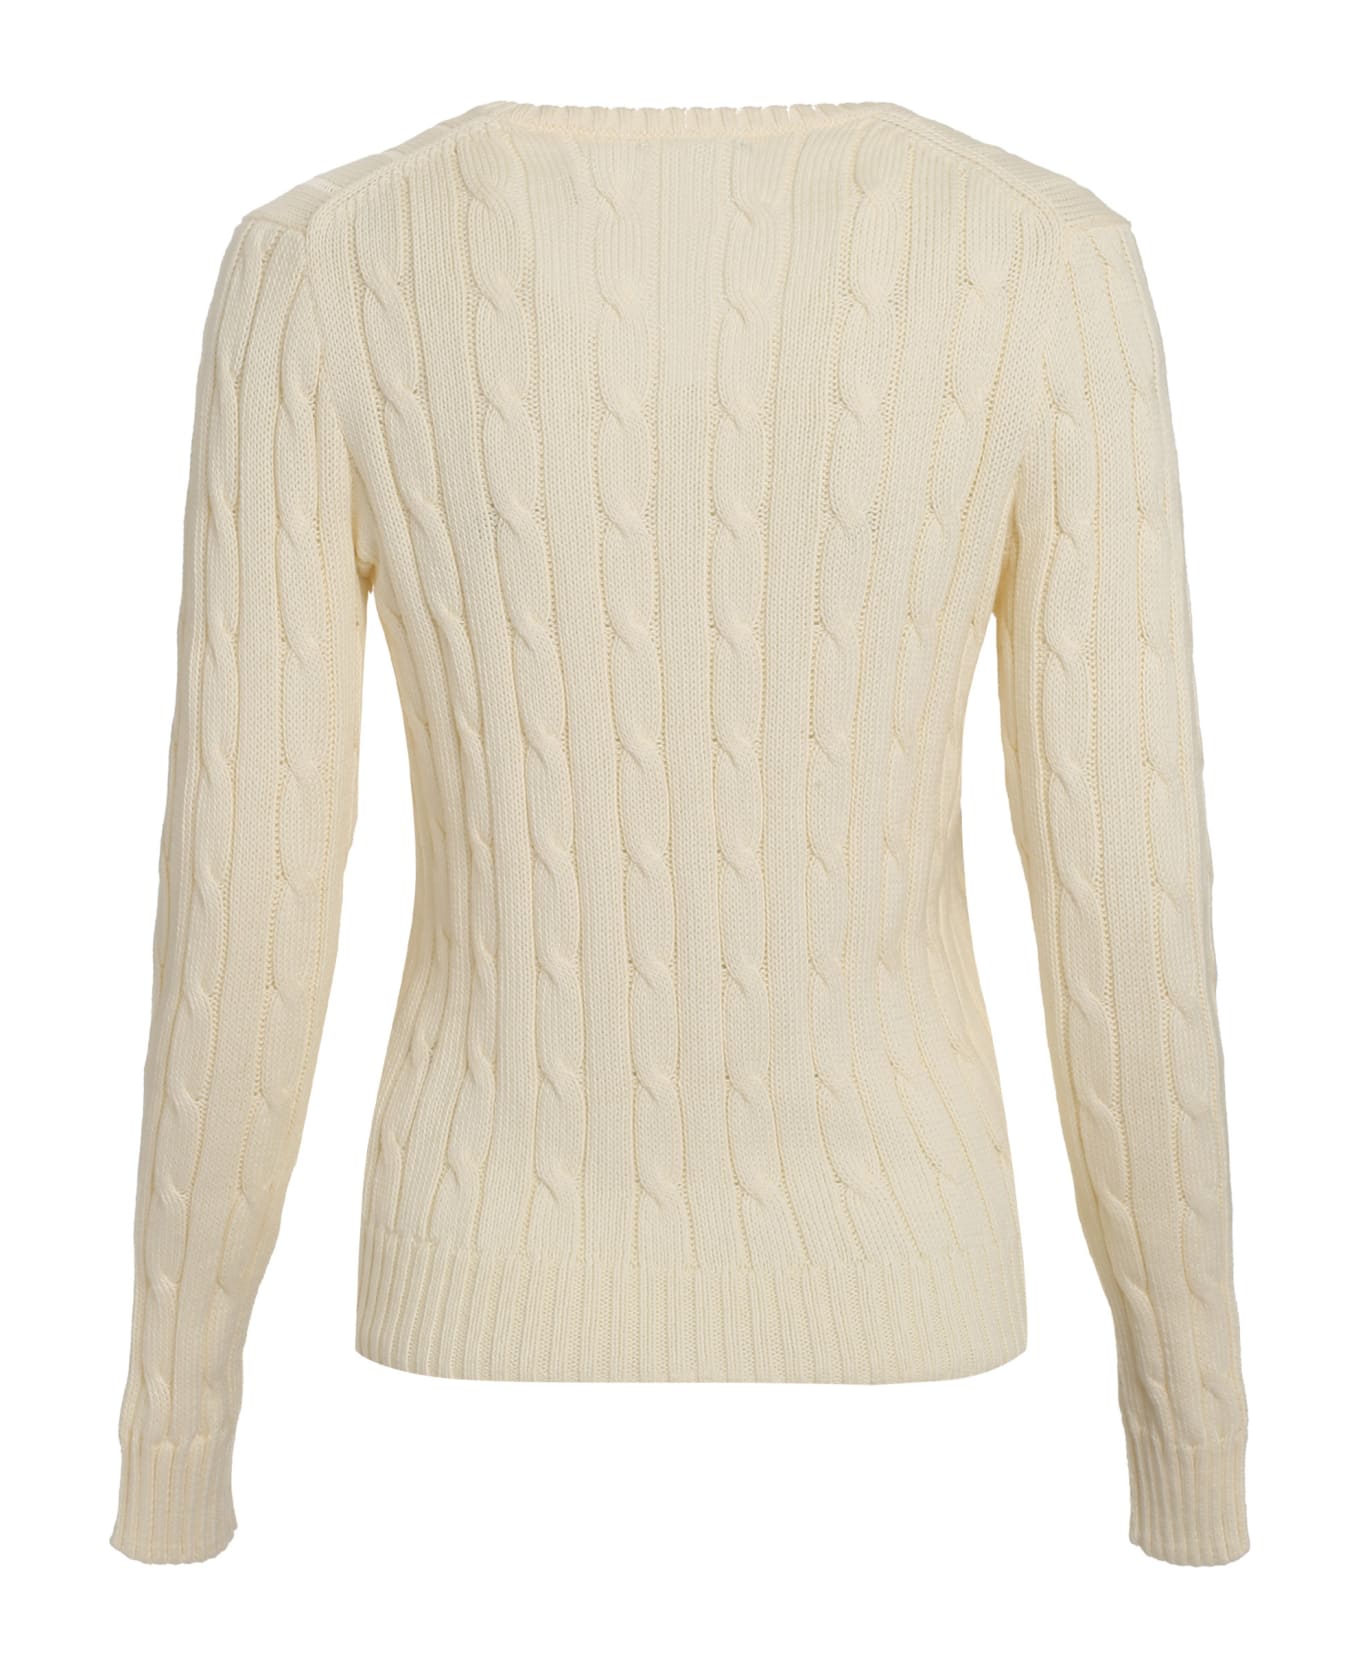 Polo Ralph Lauren Cable Knit Sweater - Beige